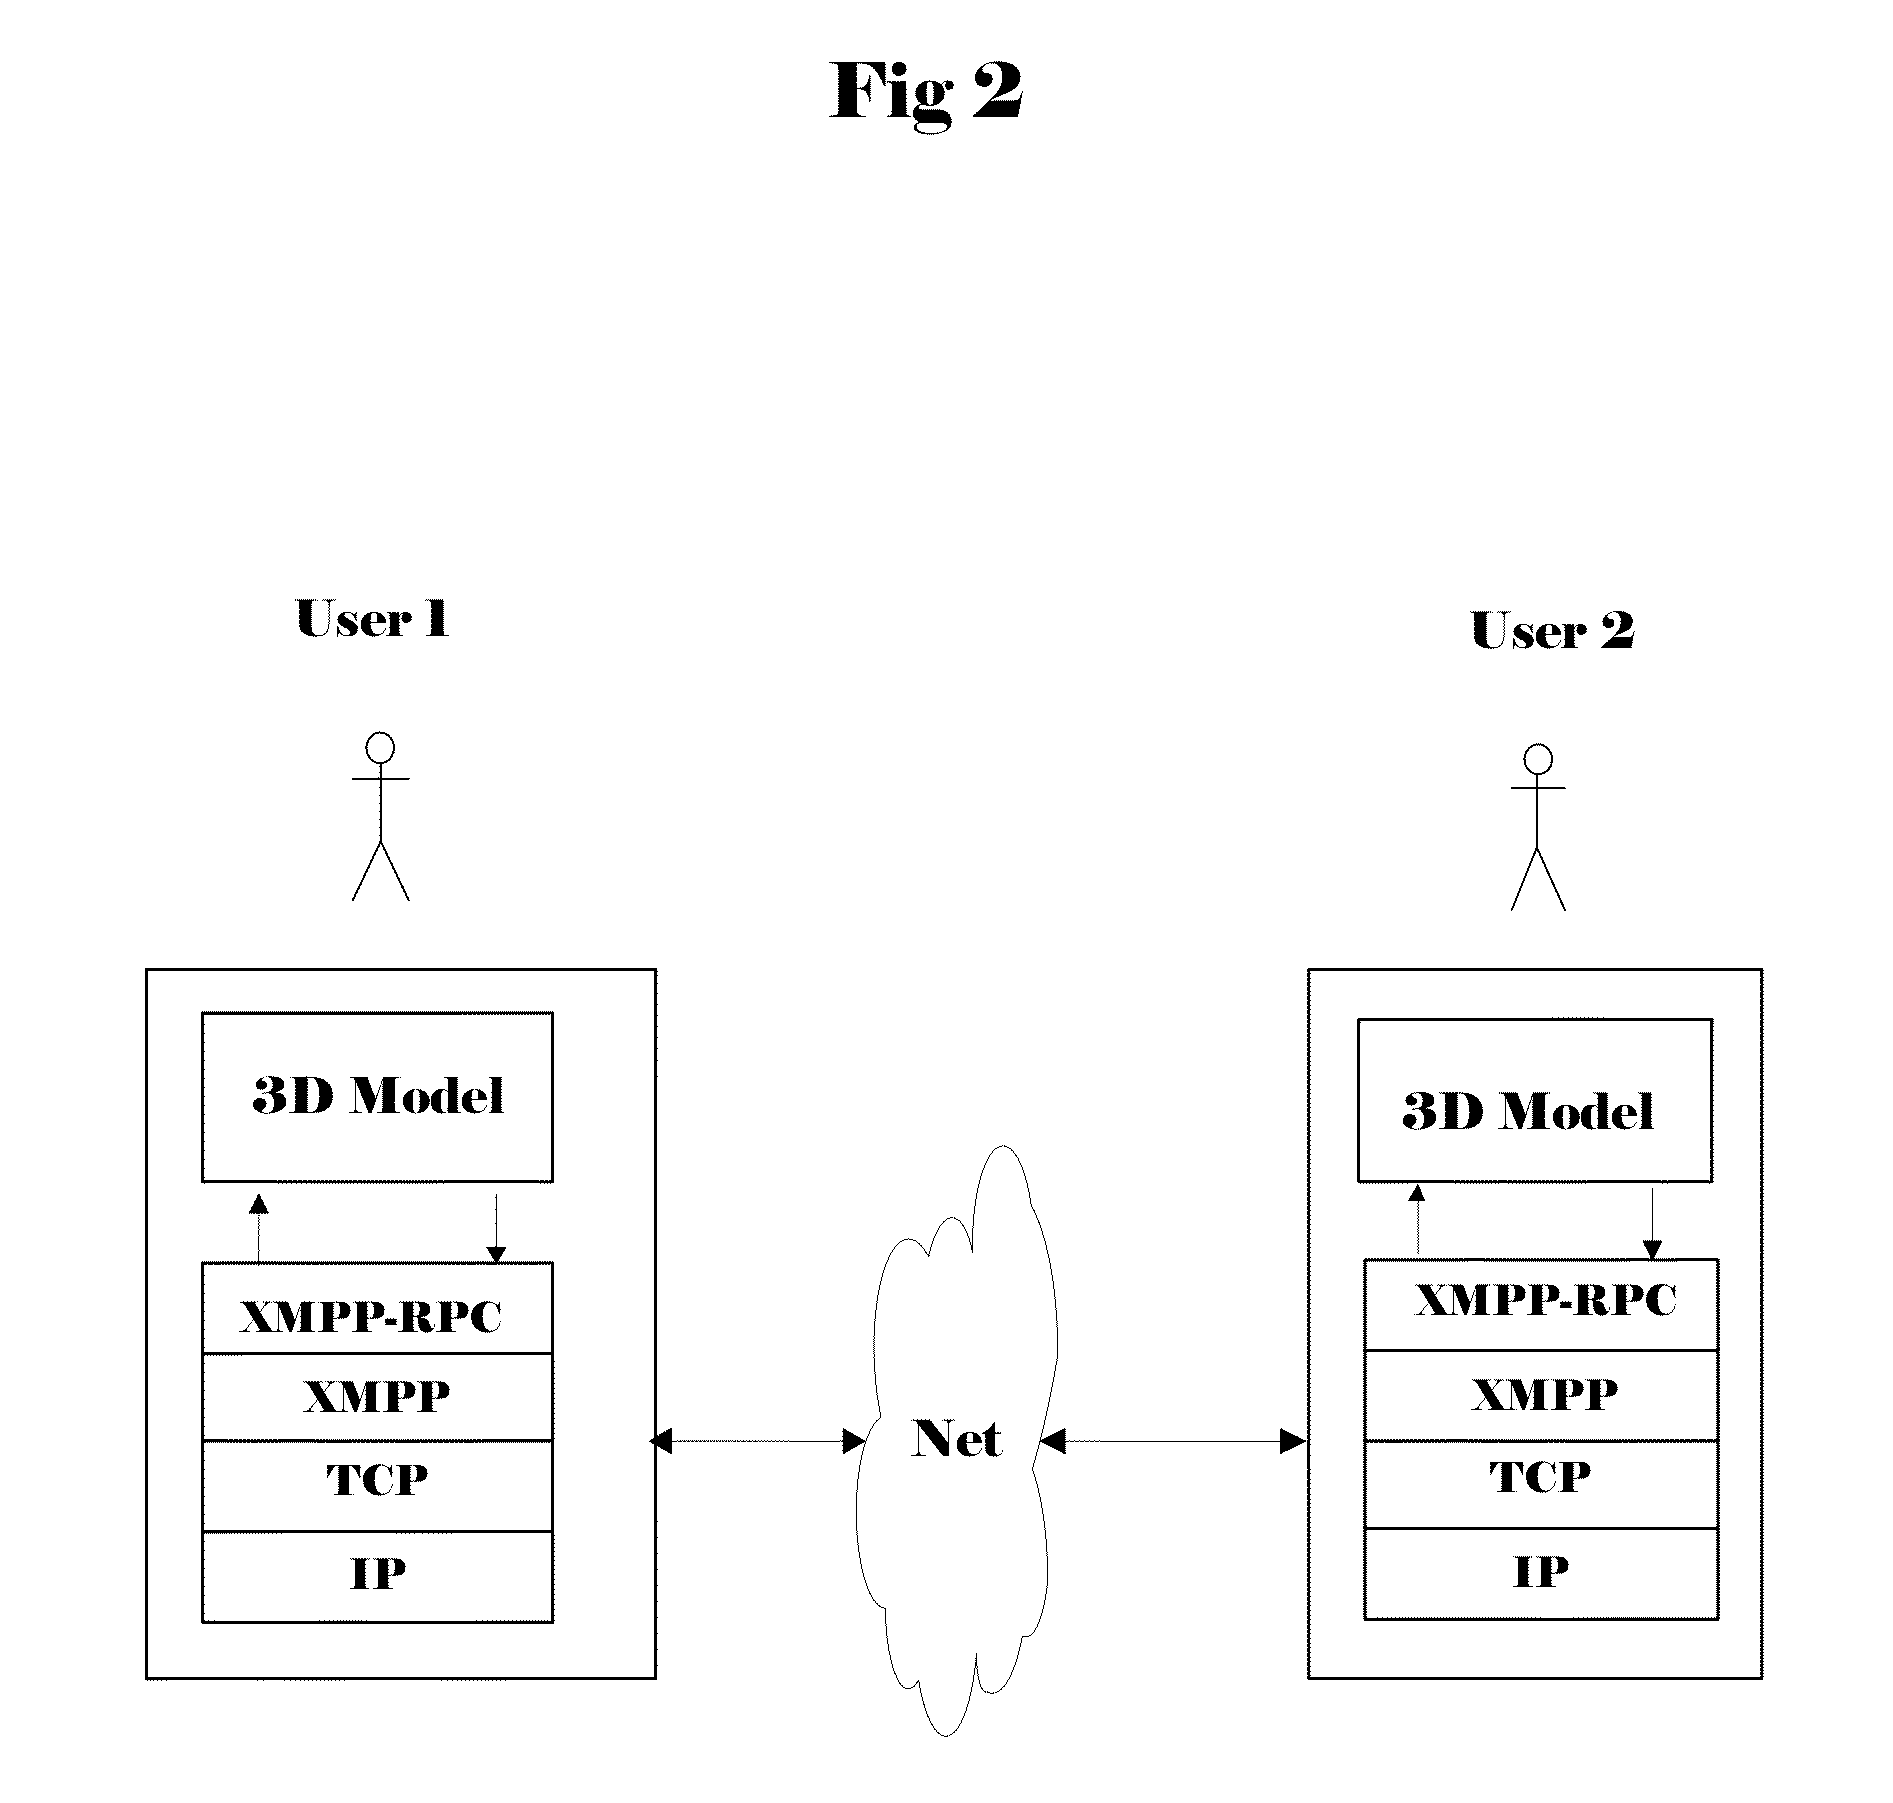 System and method for collaborative 3D visualization and real-time interaction on a computer network.